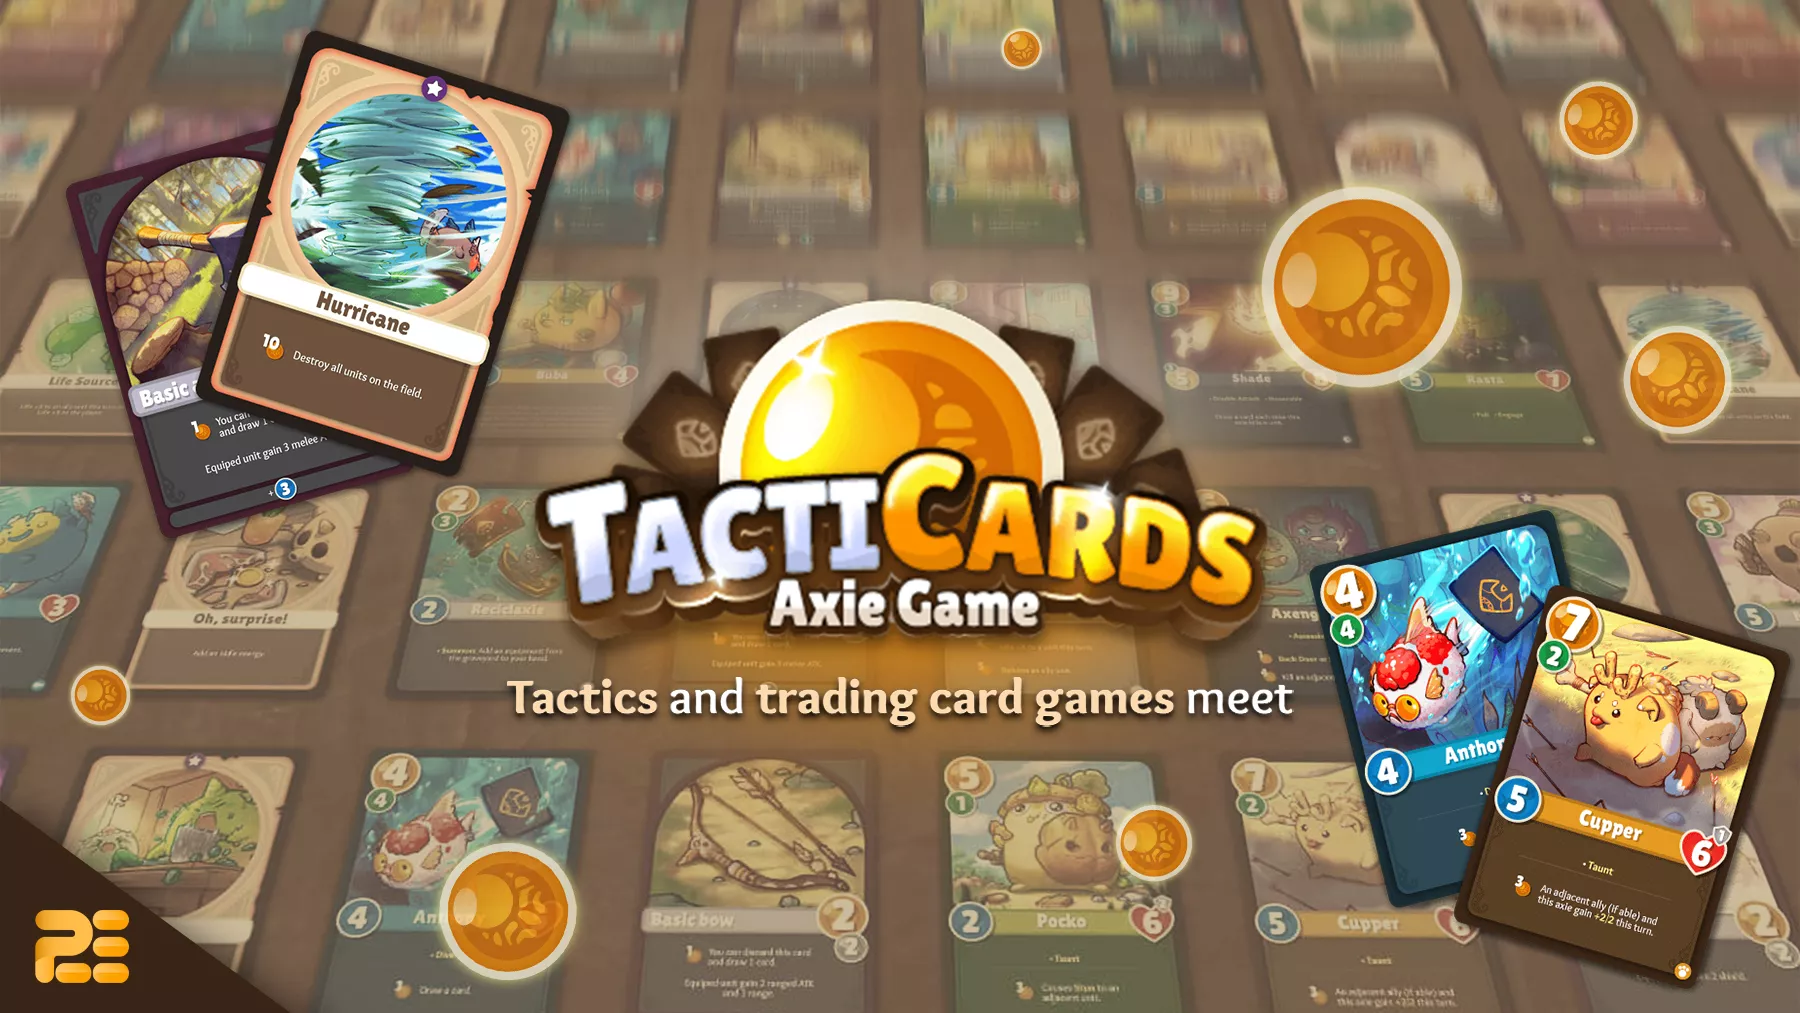 TactiCards New Axie Game Where Two Game Genres Meet